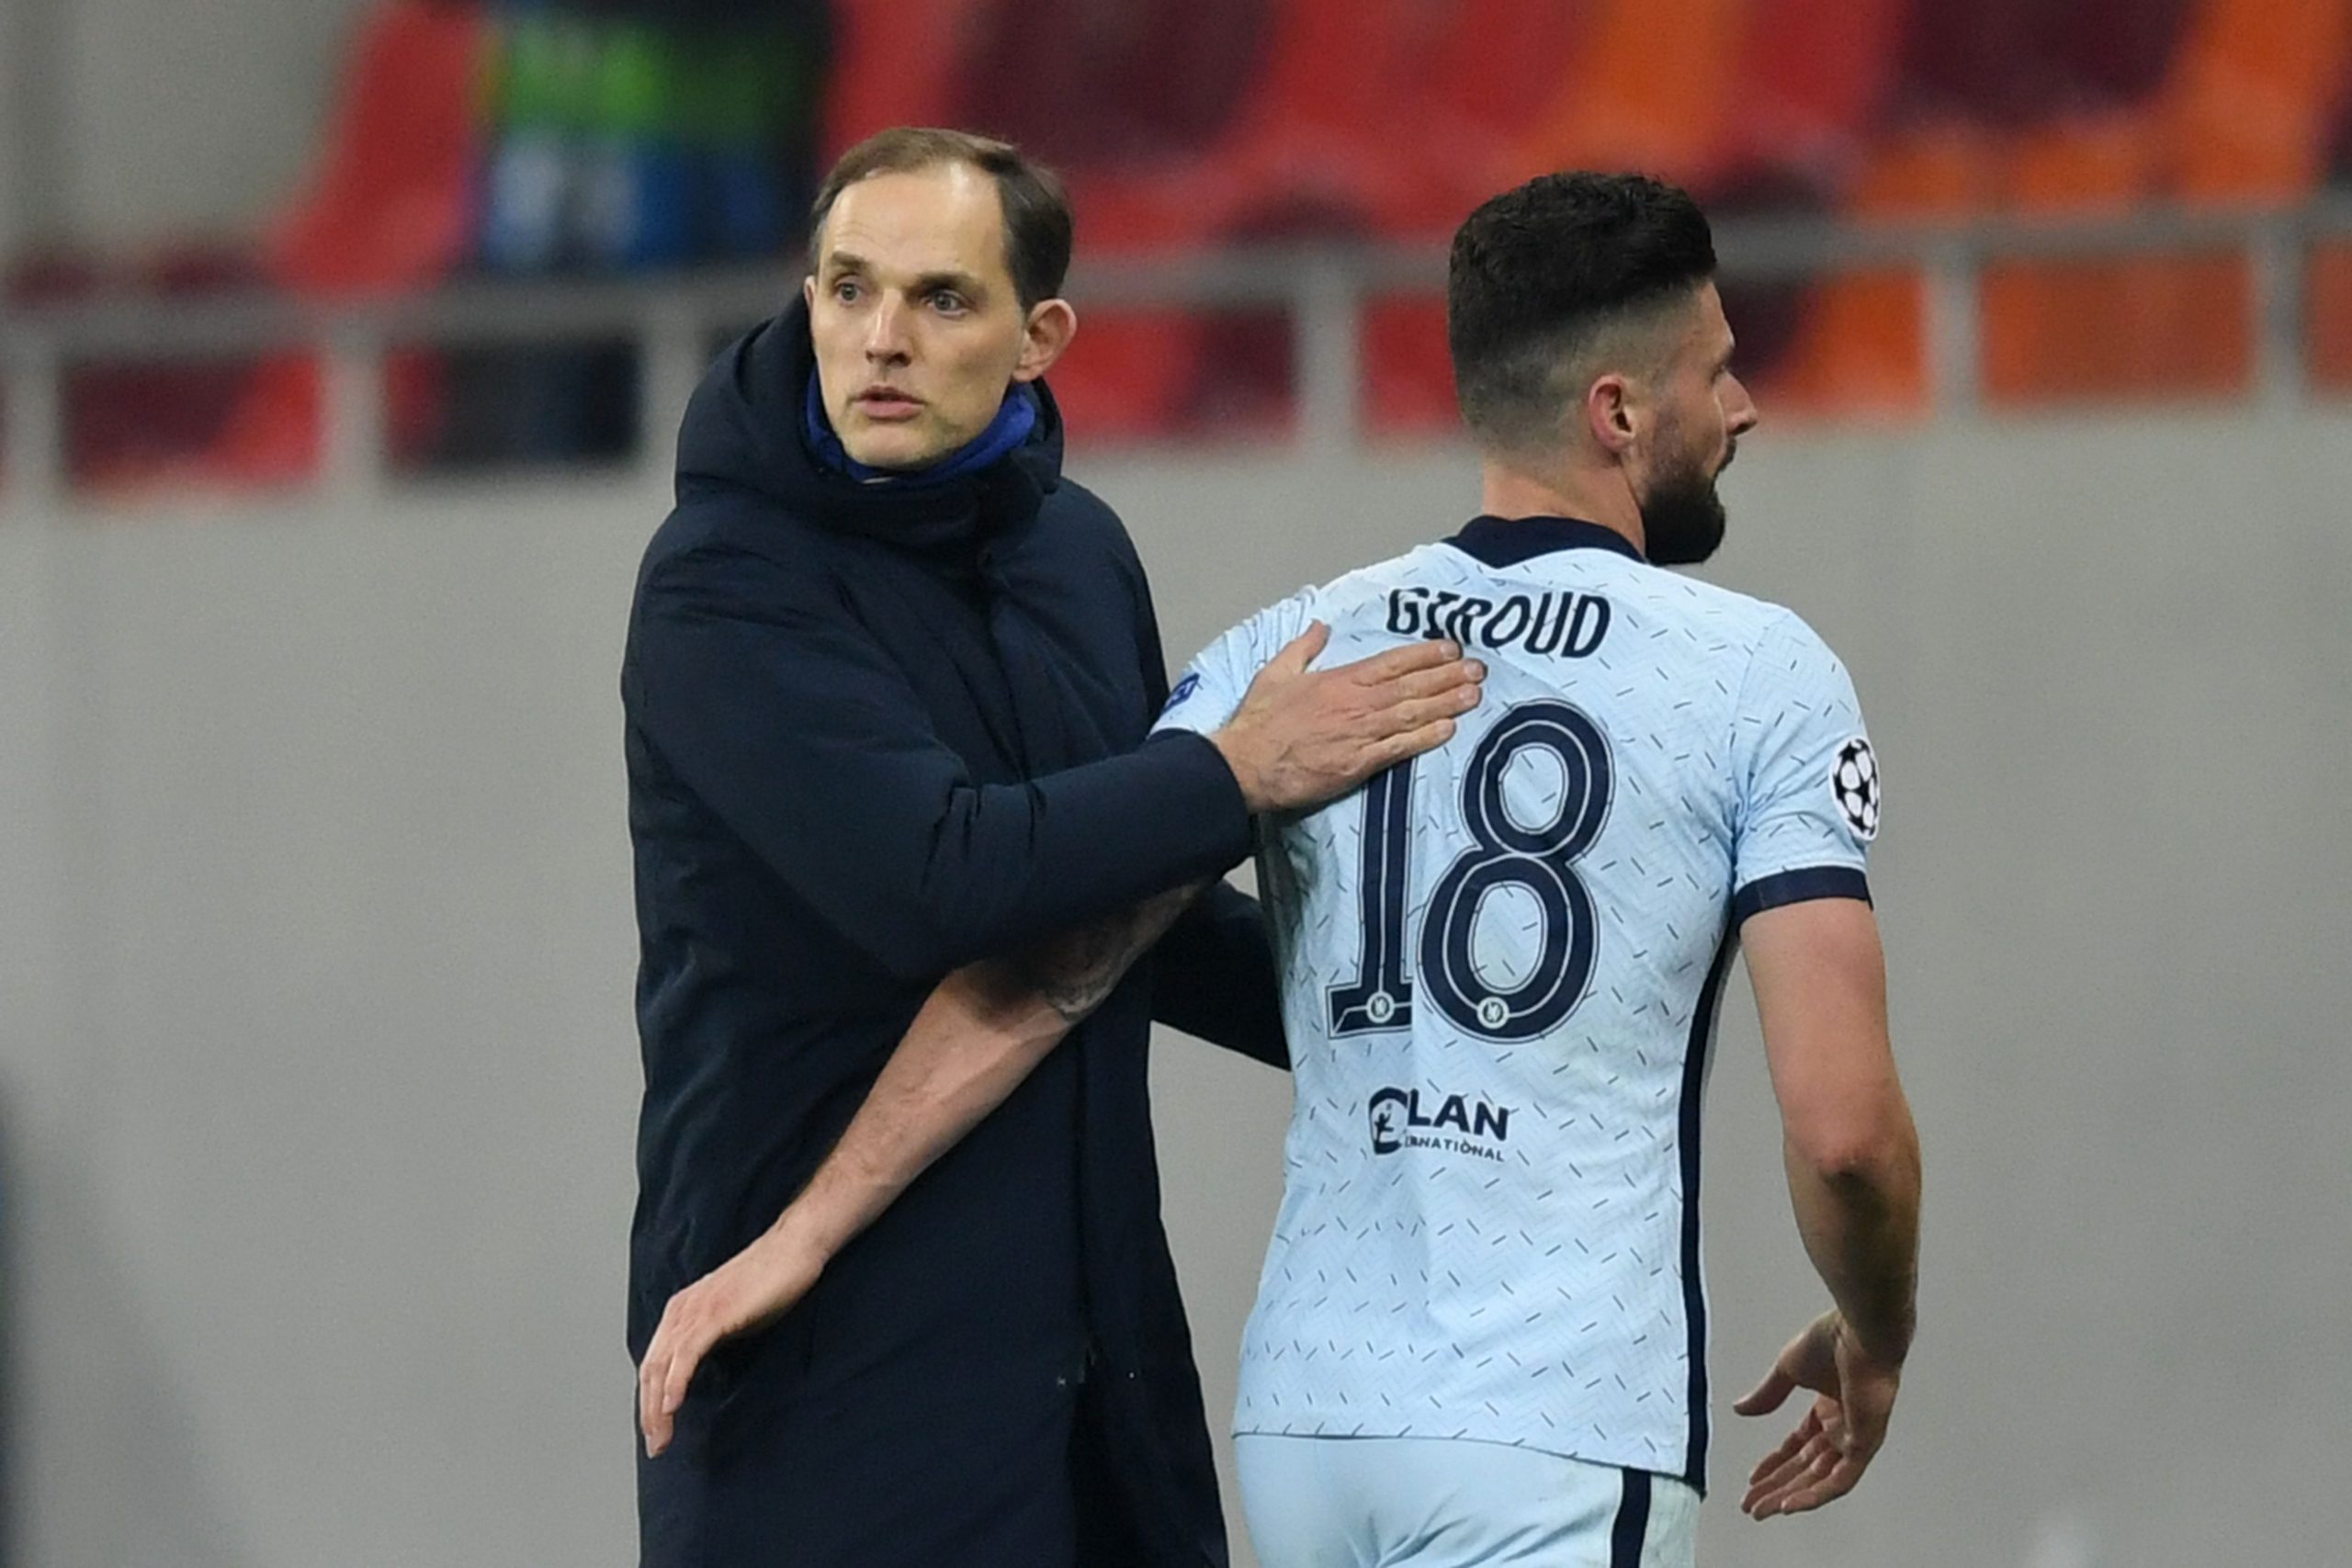 Thomas Tuchel (L) greets Chelsea's French striker Olivier Giroud during the UEFA Champions League round of 16 first leg football match between Club Atletico de Madrid and Chelsea.